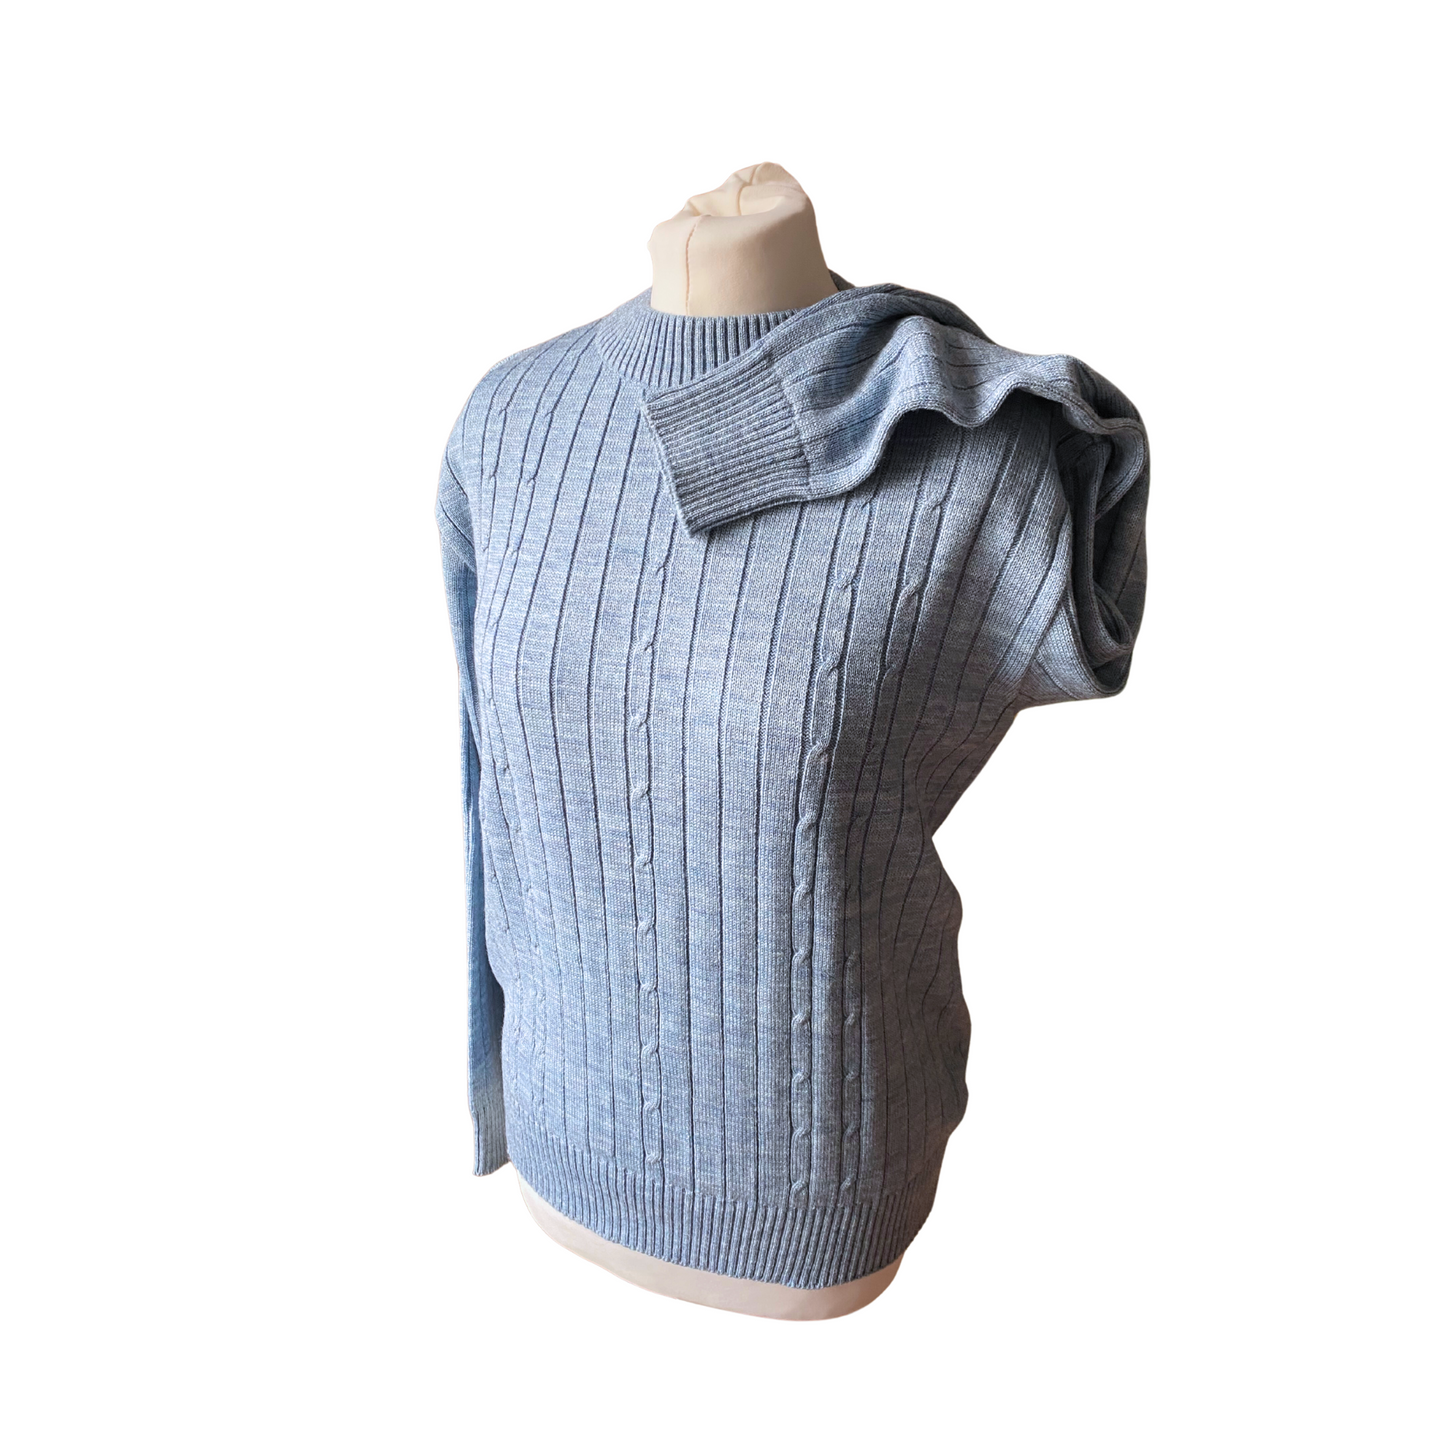 Fine ribbed neckline, cuffs, and hem - classic 70s sweater - shown on female mannequin